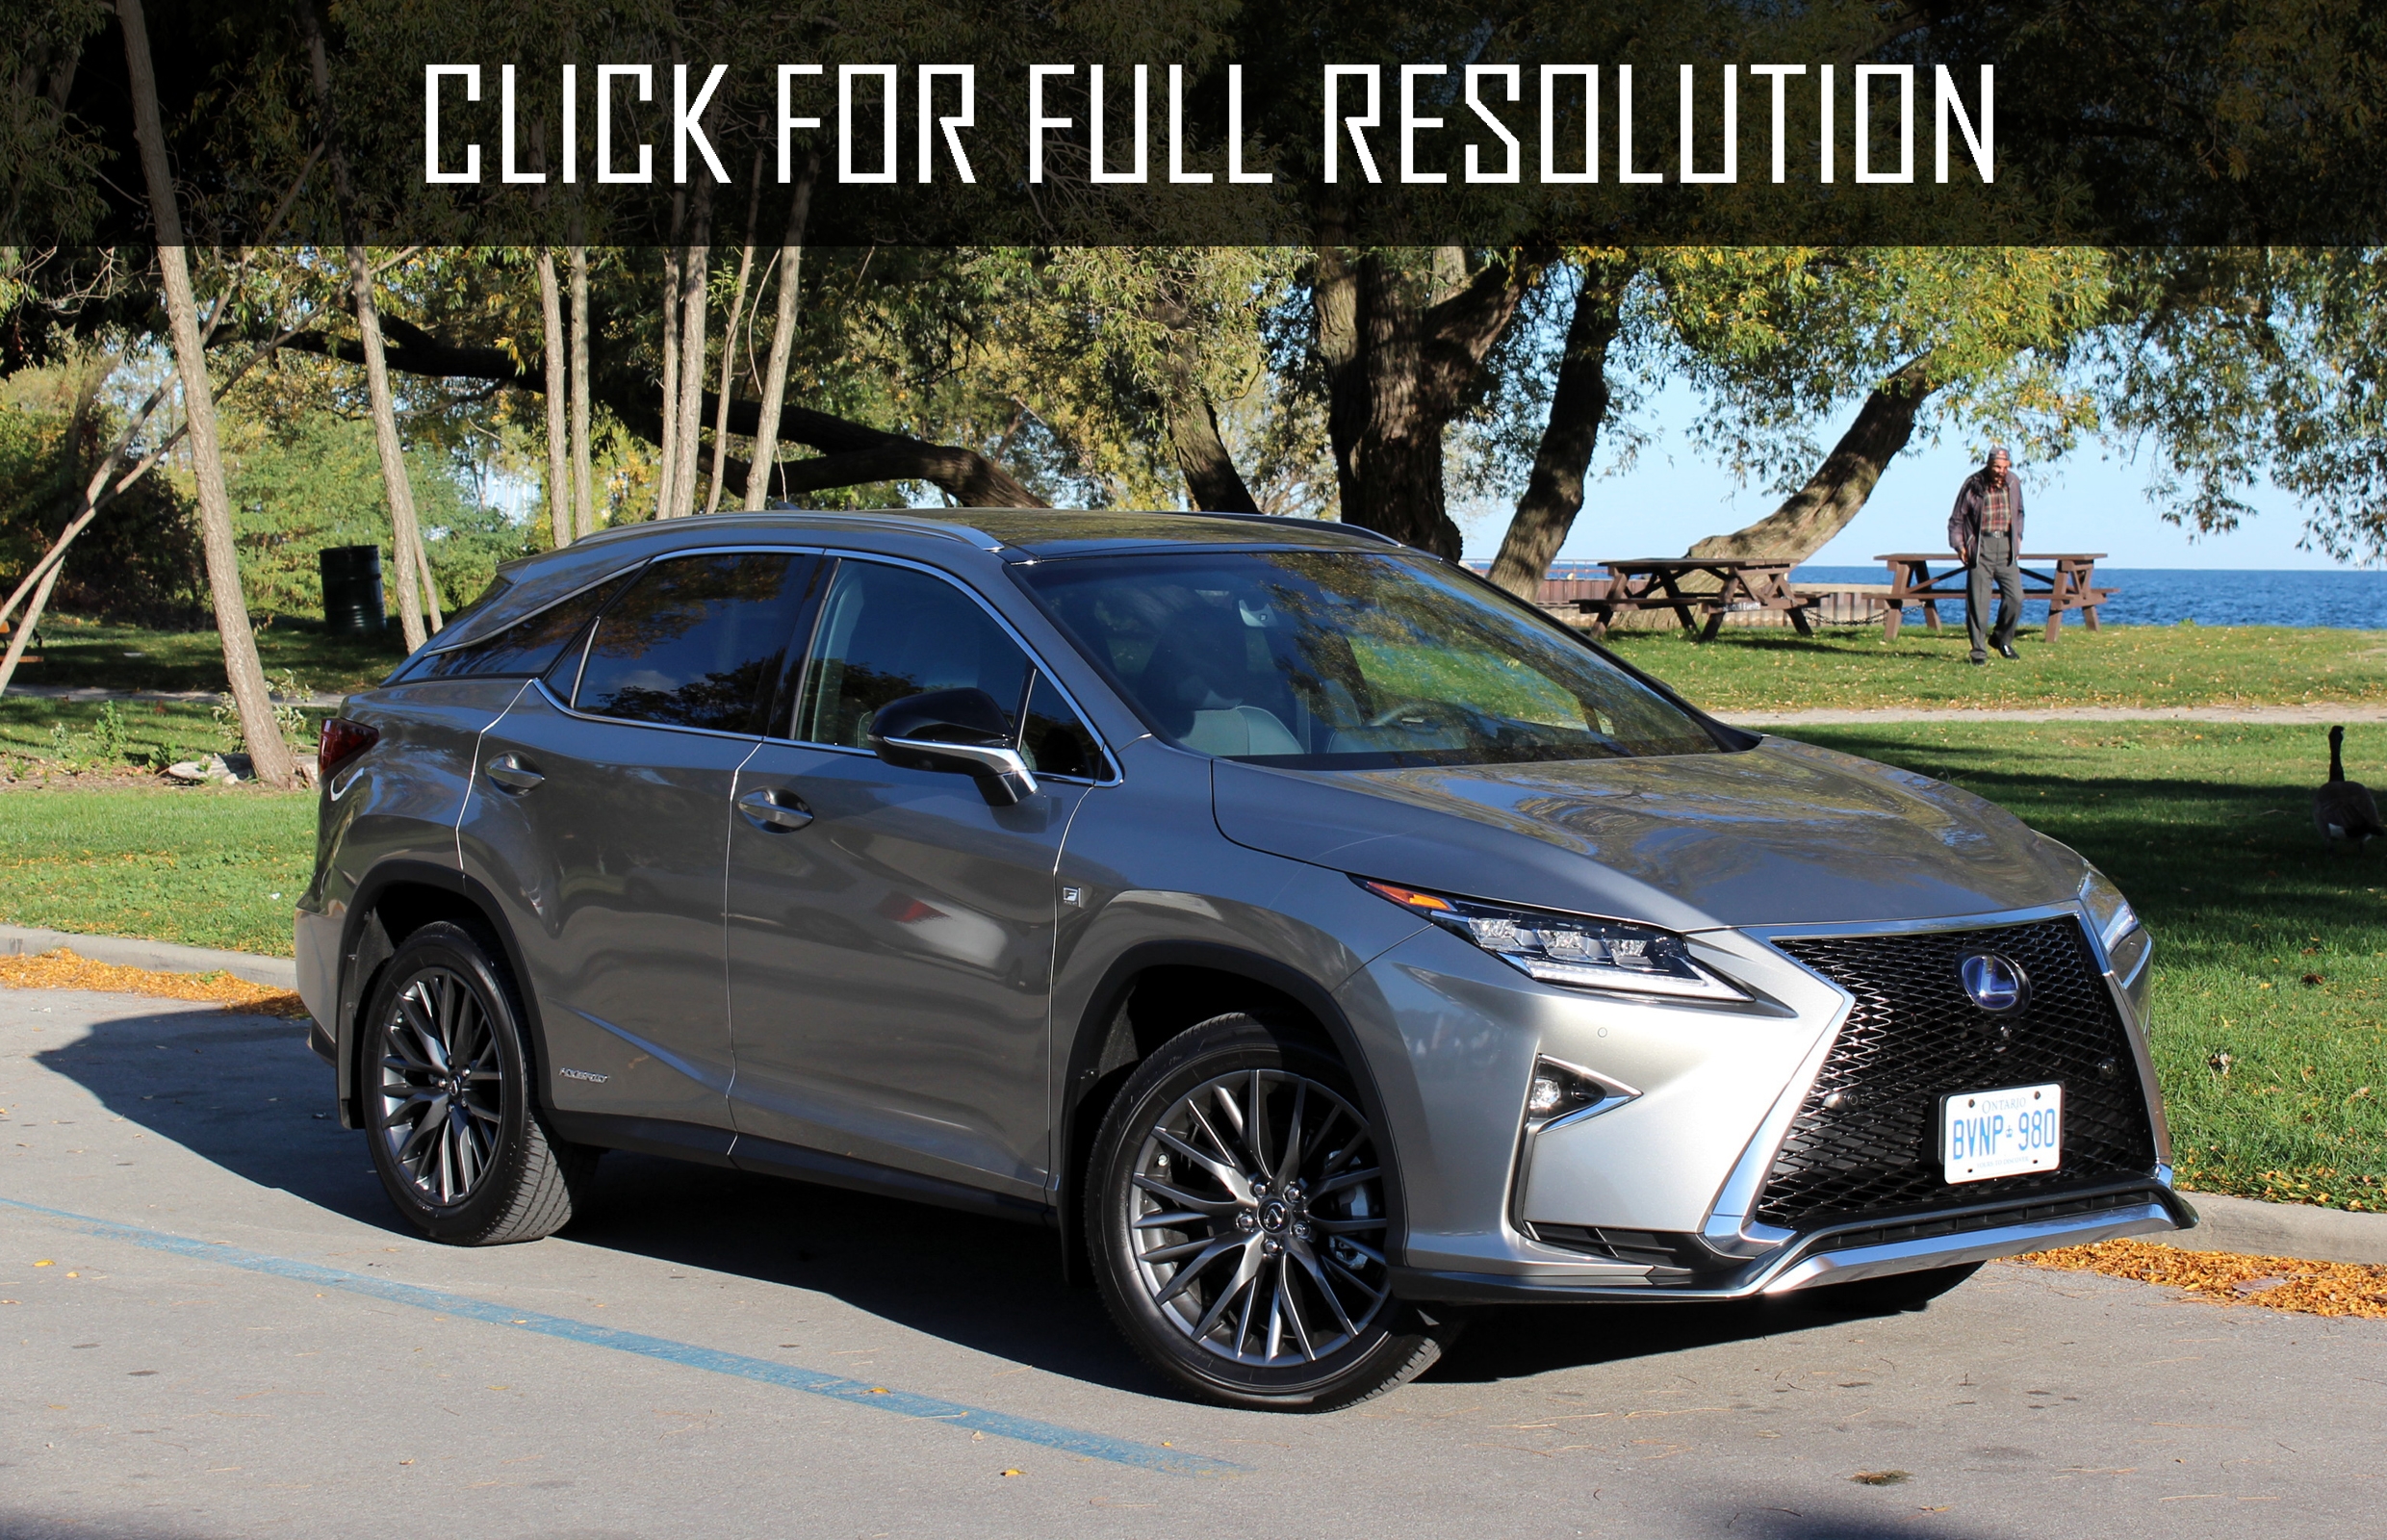 2017 Lexus Rx 450h news, reviews, msrp, ratings with